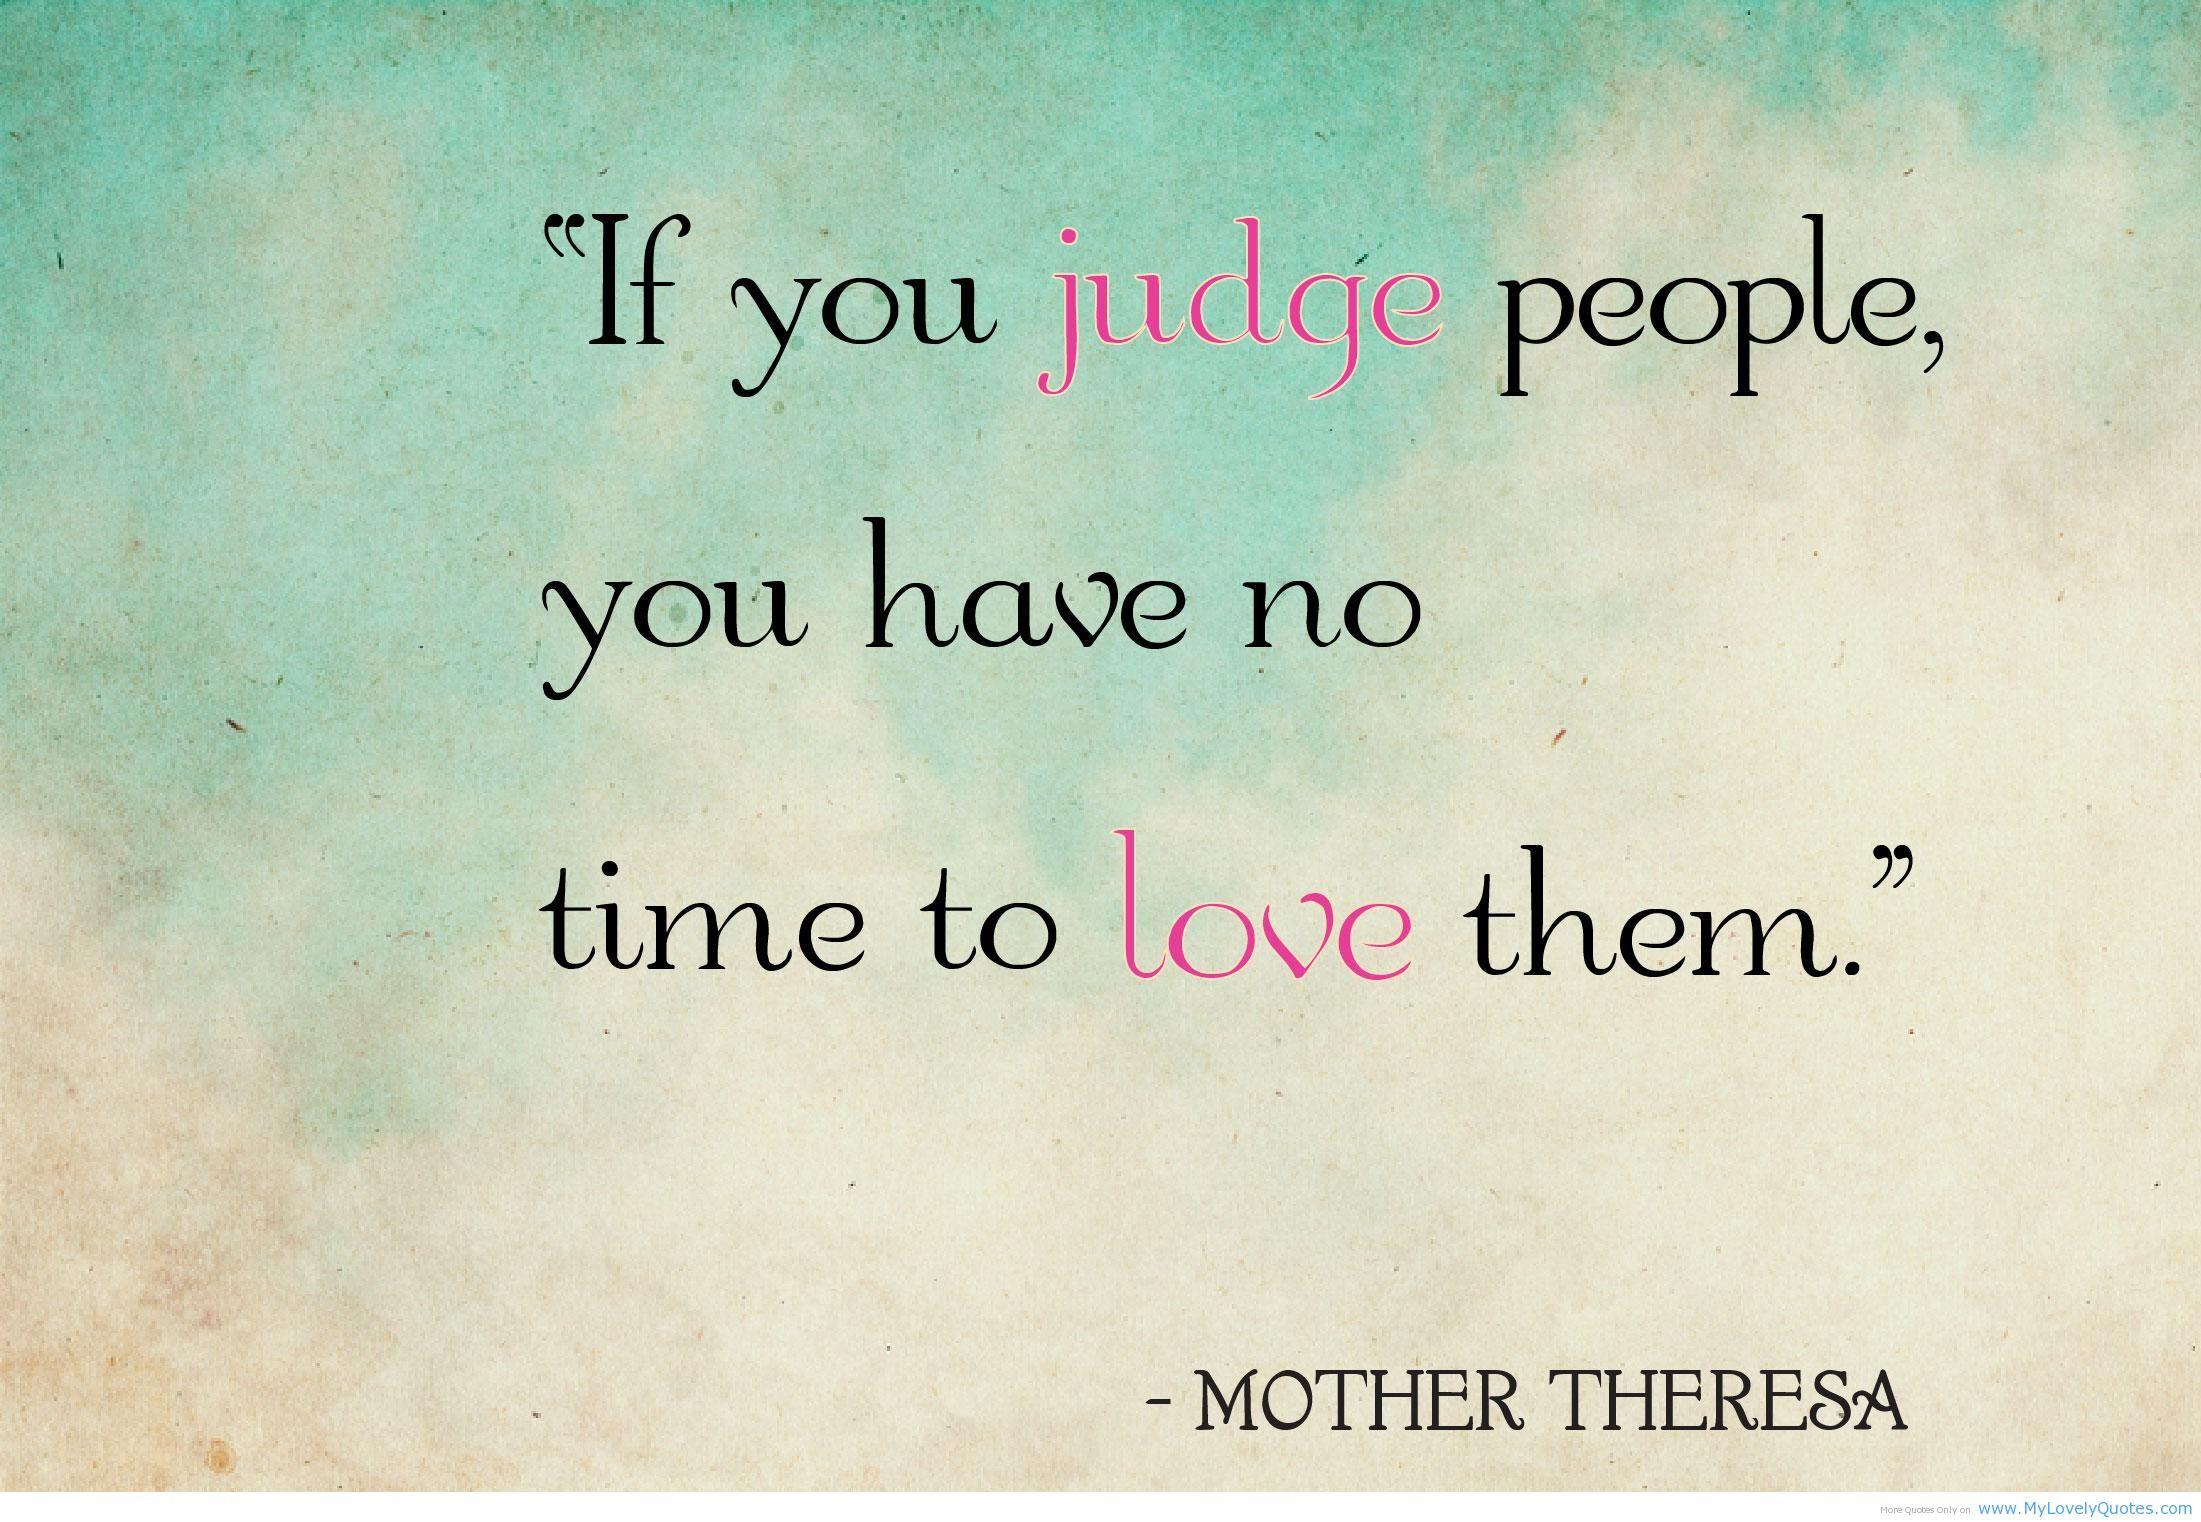 Mother Teresa Quotes On Family
 Mother Teresa Quotes About Family QuotesGram